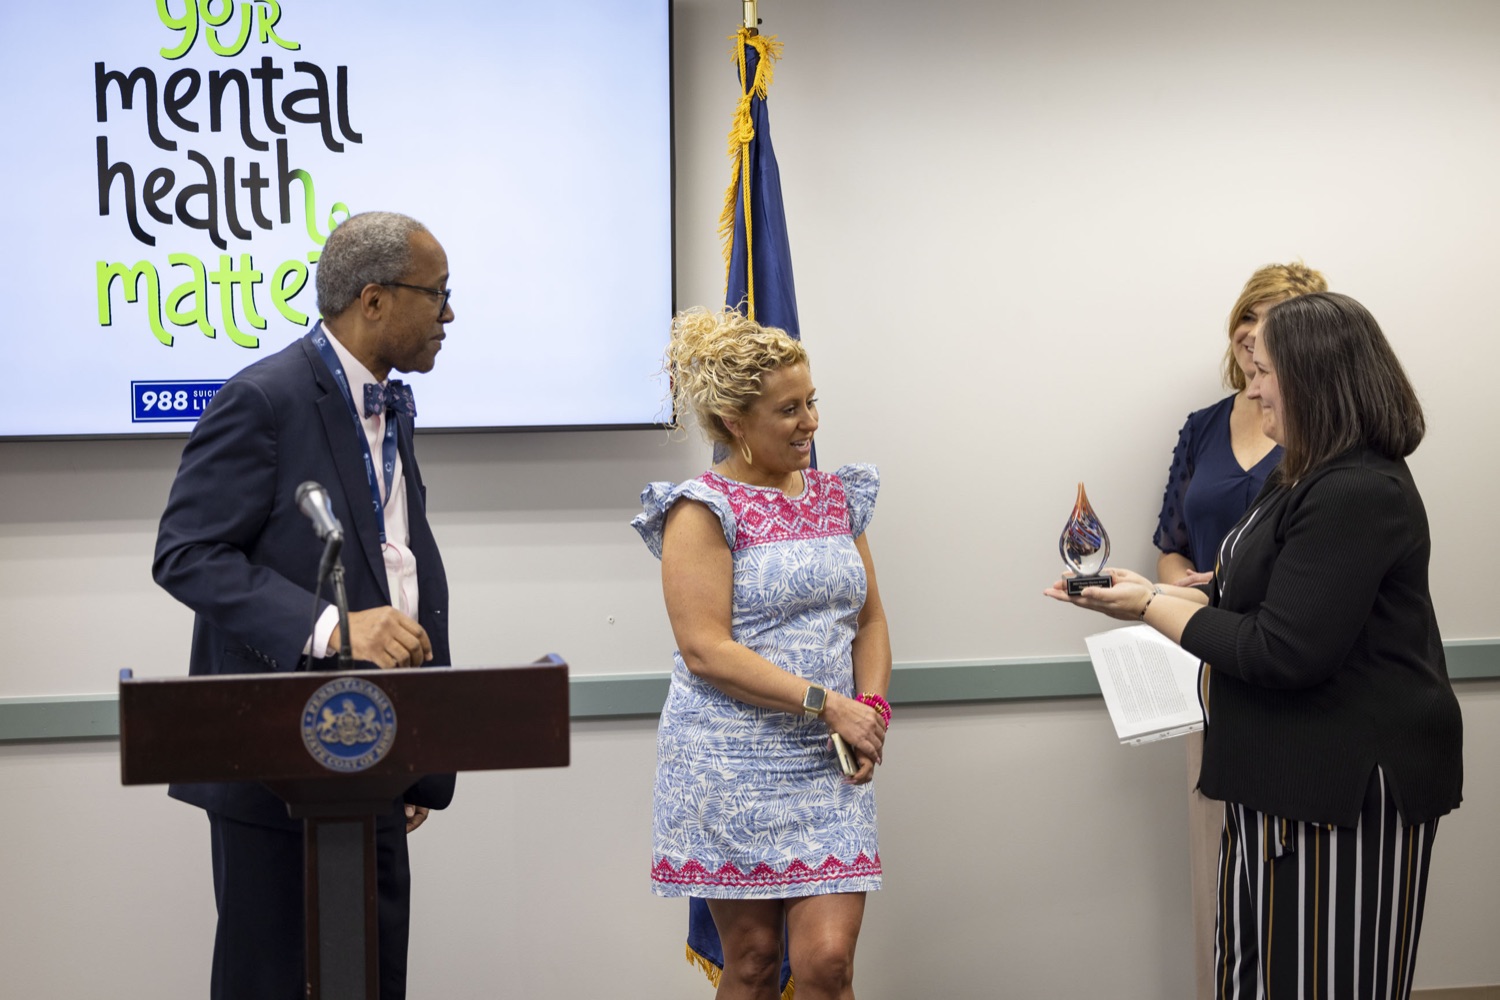 DHS Office of Mental Health and Substance Abuse Services (OMHSAS) Deputy Secretary Jen Smith presents the Dennis Marion Impact Award to Megan Johnston, Senior Human Services Program Manager with the Cumberland-Perry Mental Health Office, in Carlisle, PA on May 24, 2023.<br><a href="https://filesource.amperwave.net/commonwealthofpa/photo/23090_dhs_mentalHealth_16.jpg" target="_blank">⇣ Download Photo</a>